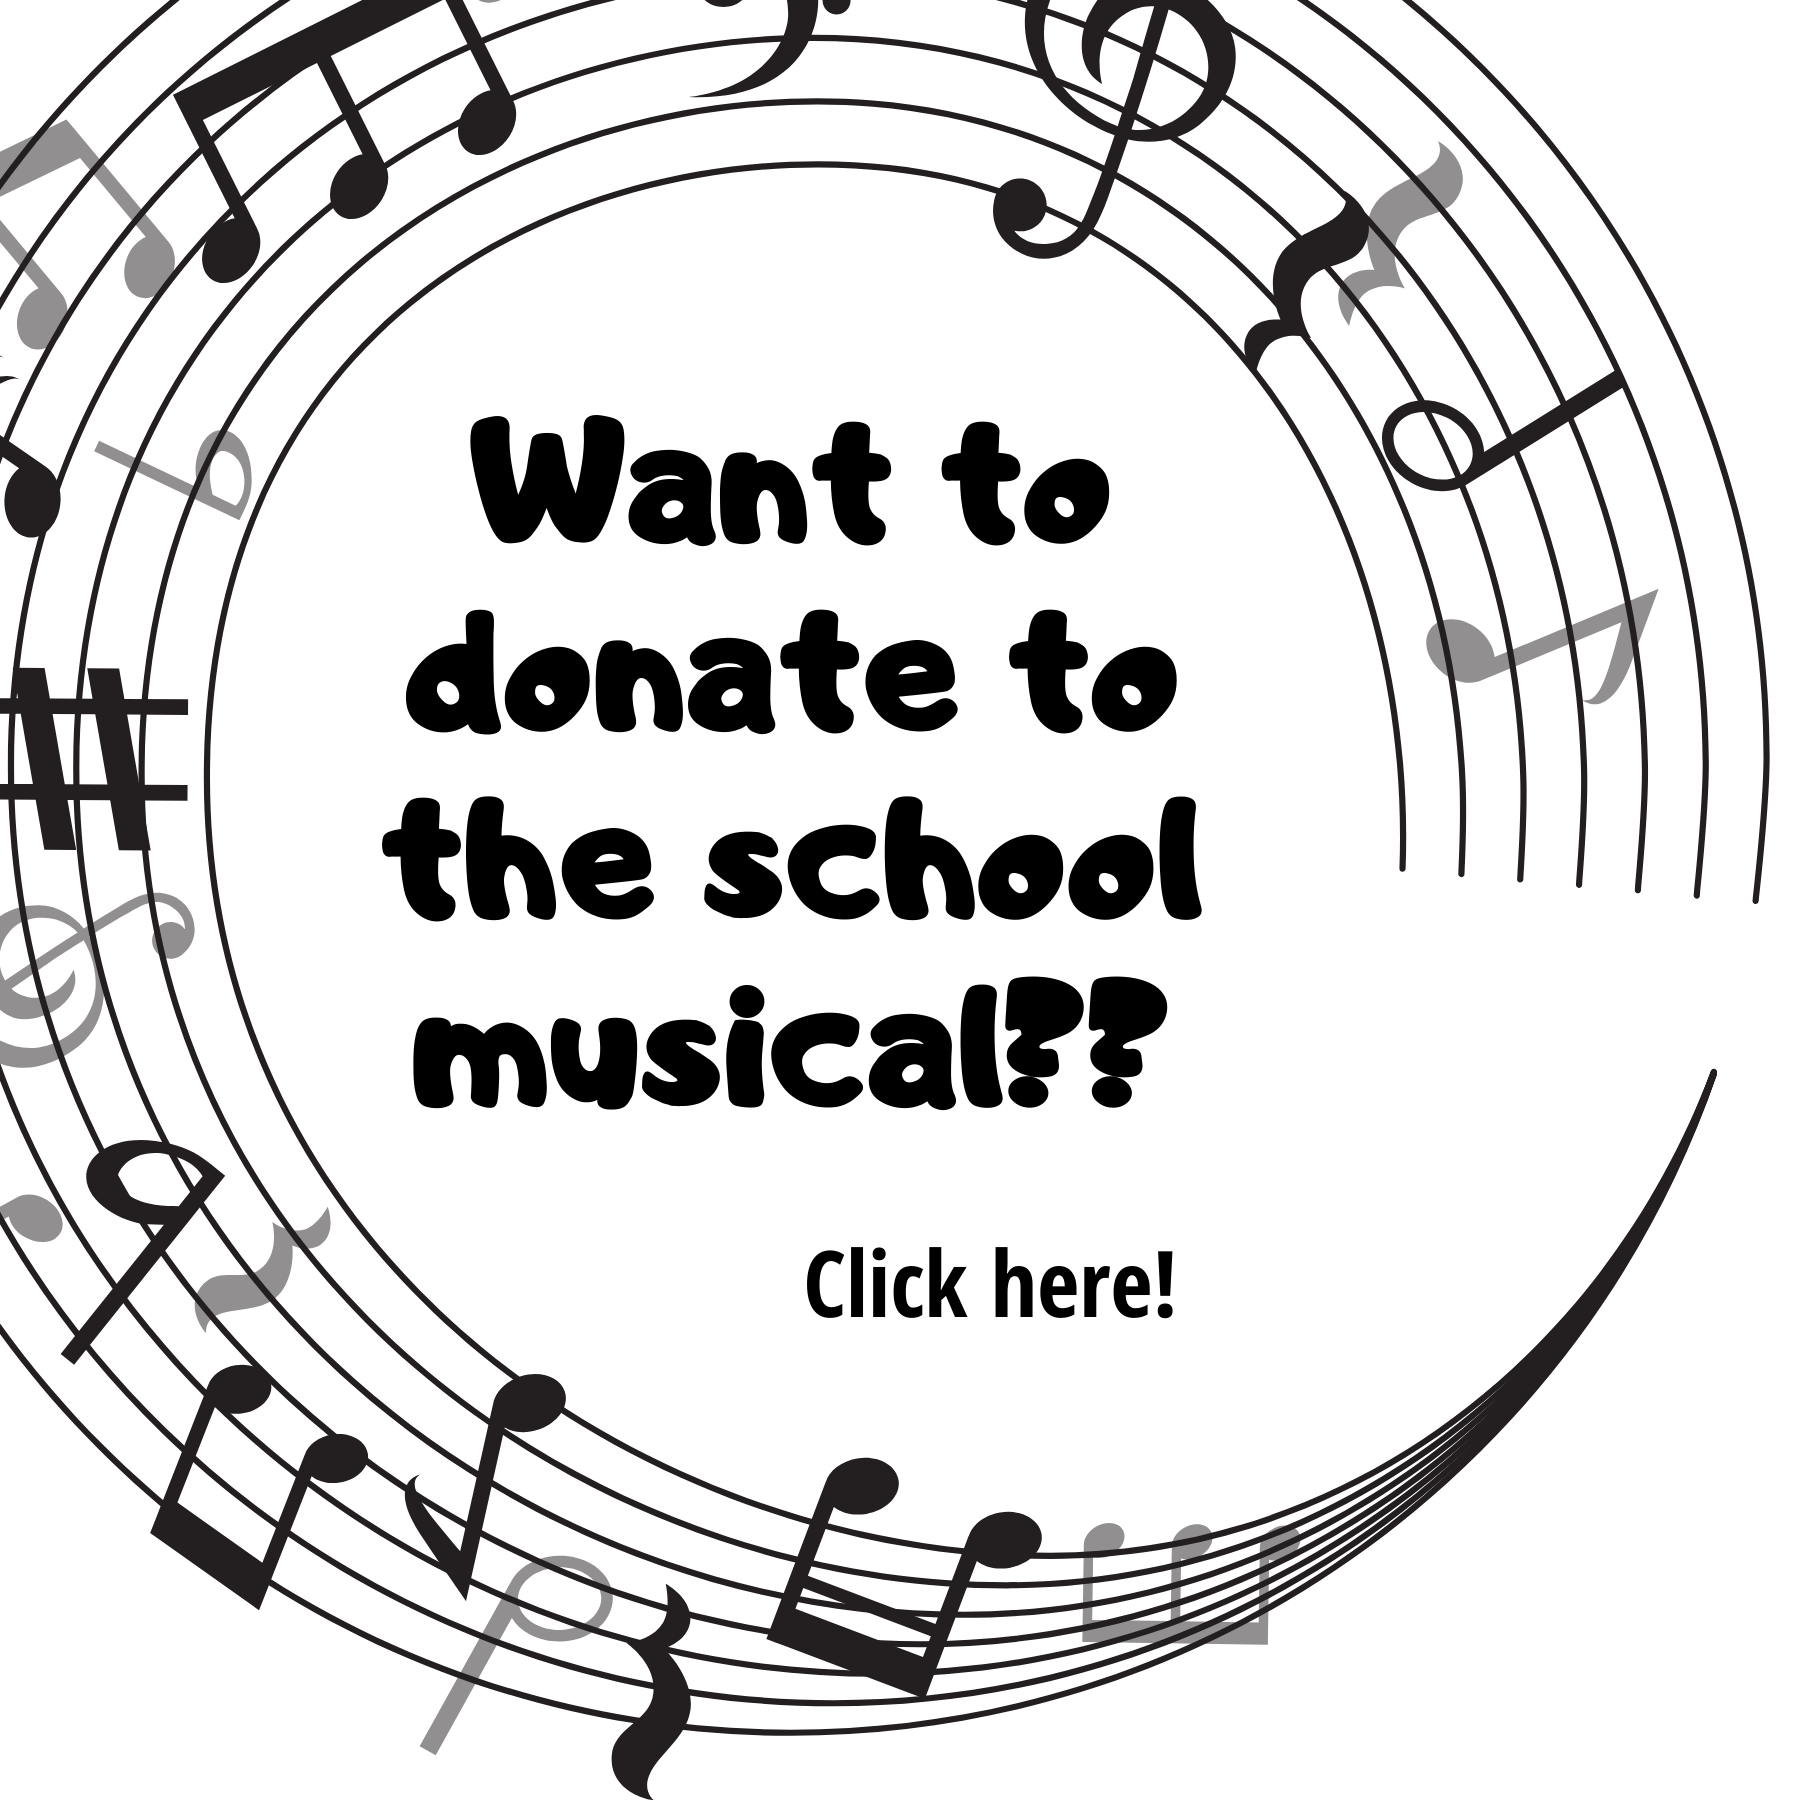 Click here to donate to the school musical.